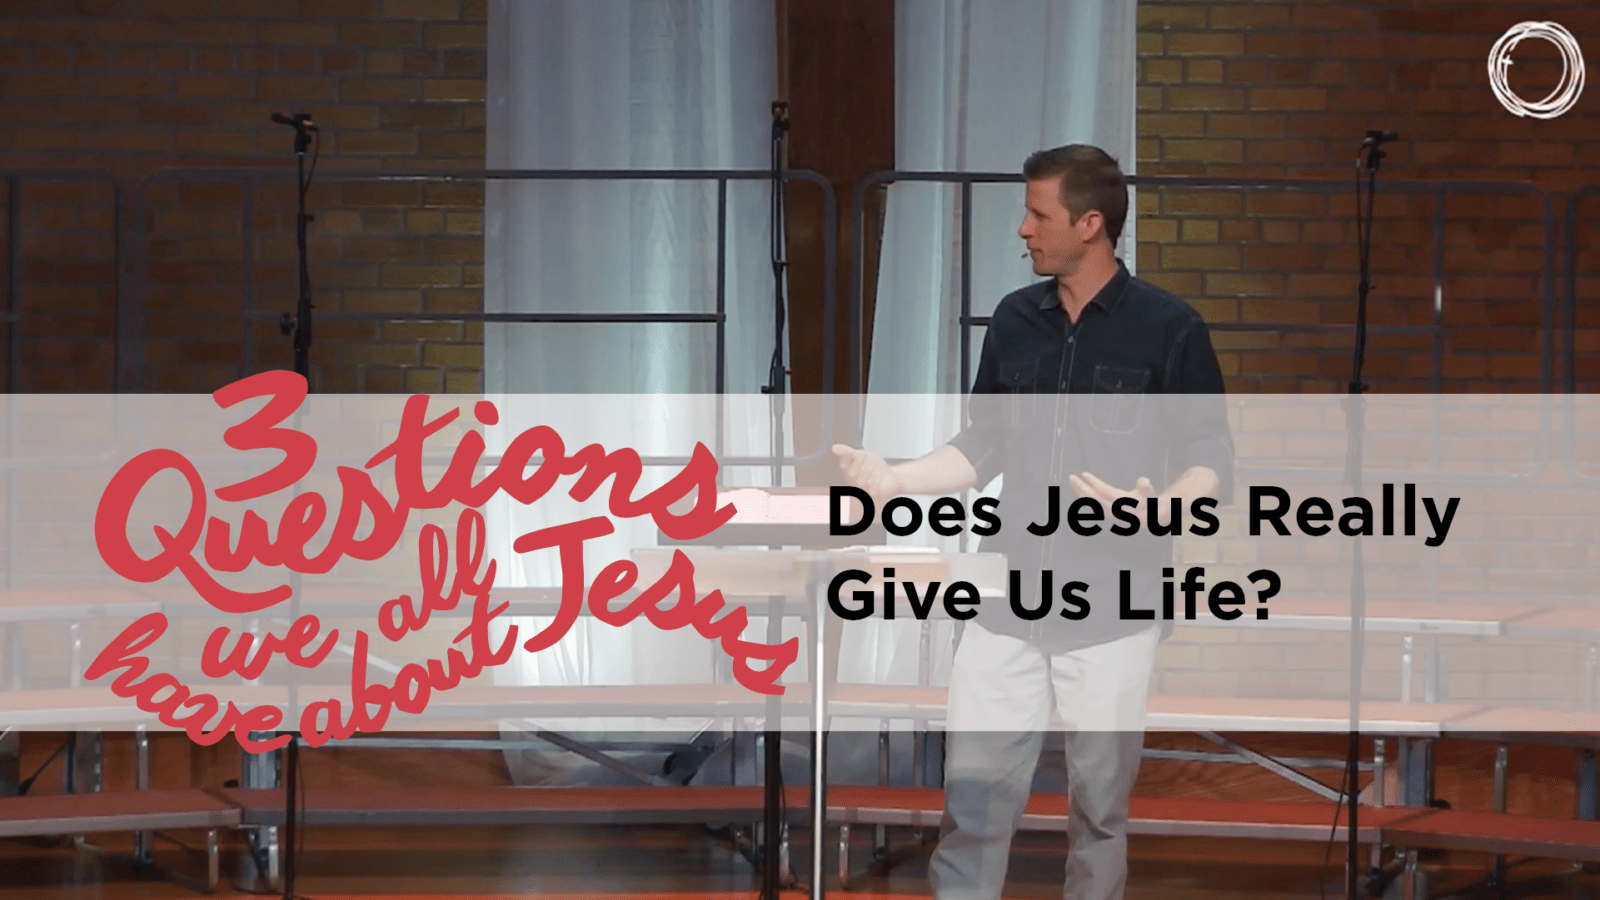 Does Jesus Really Give Us Life?